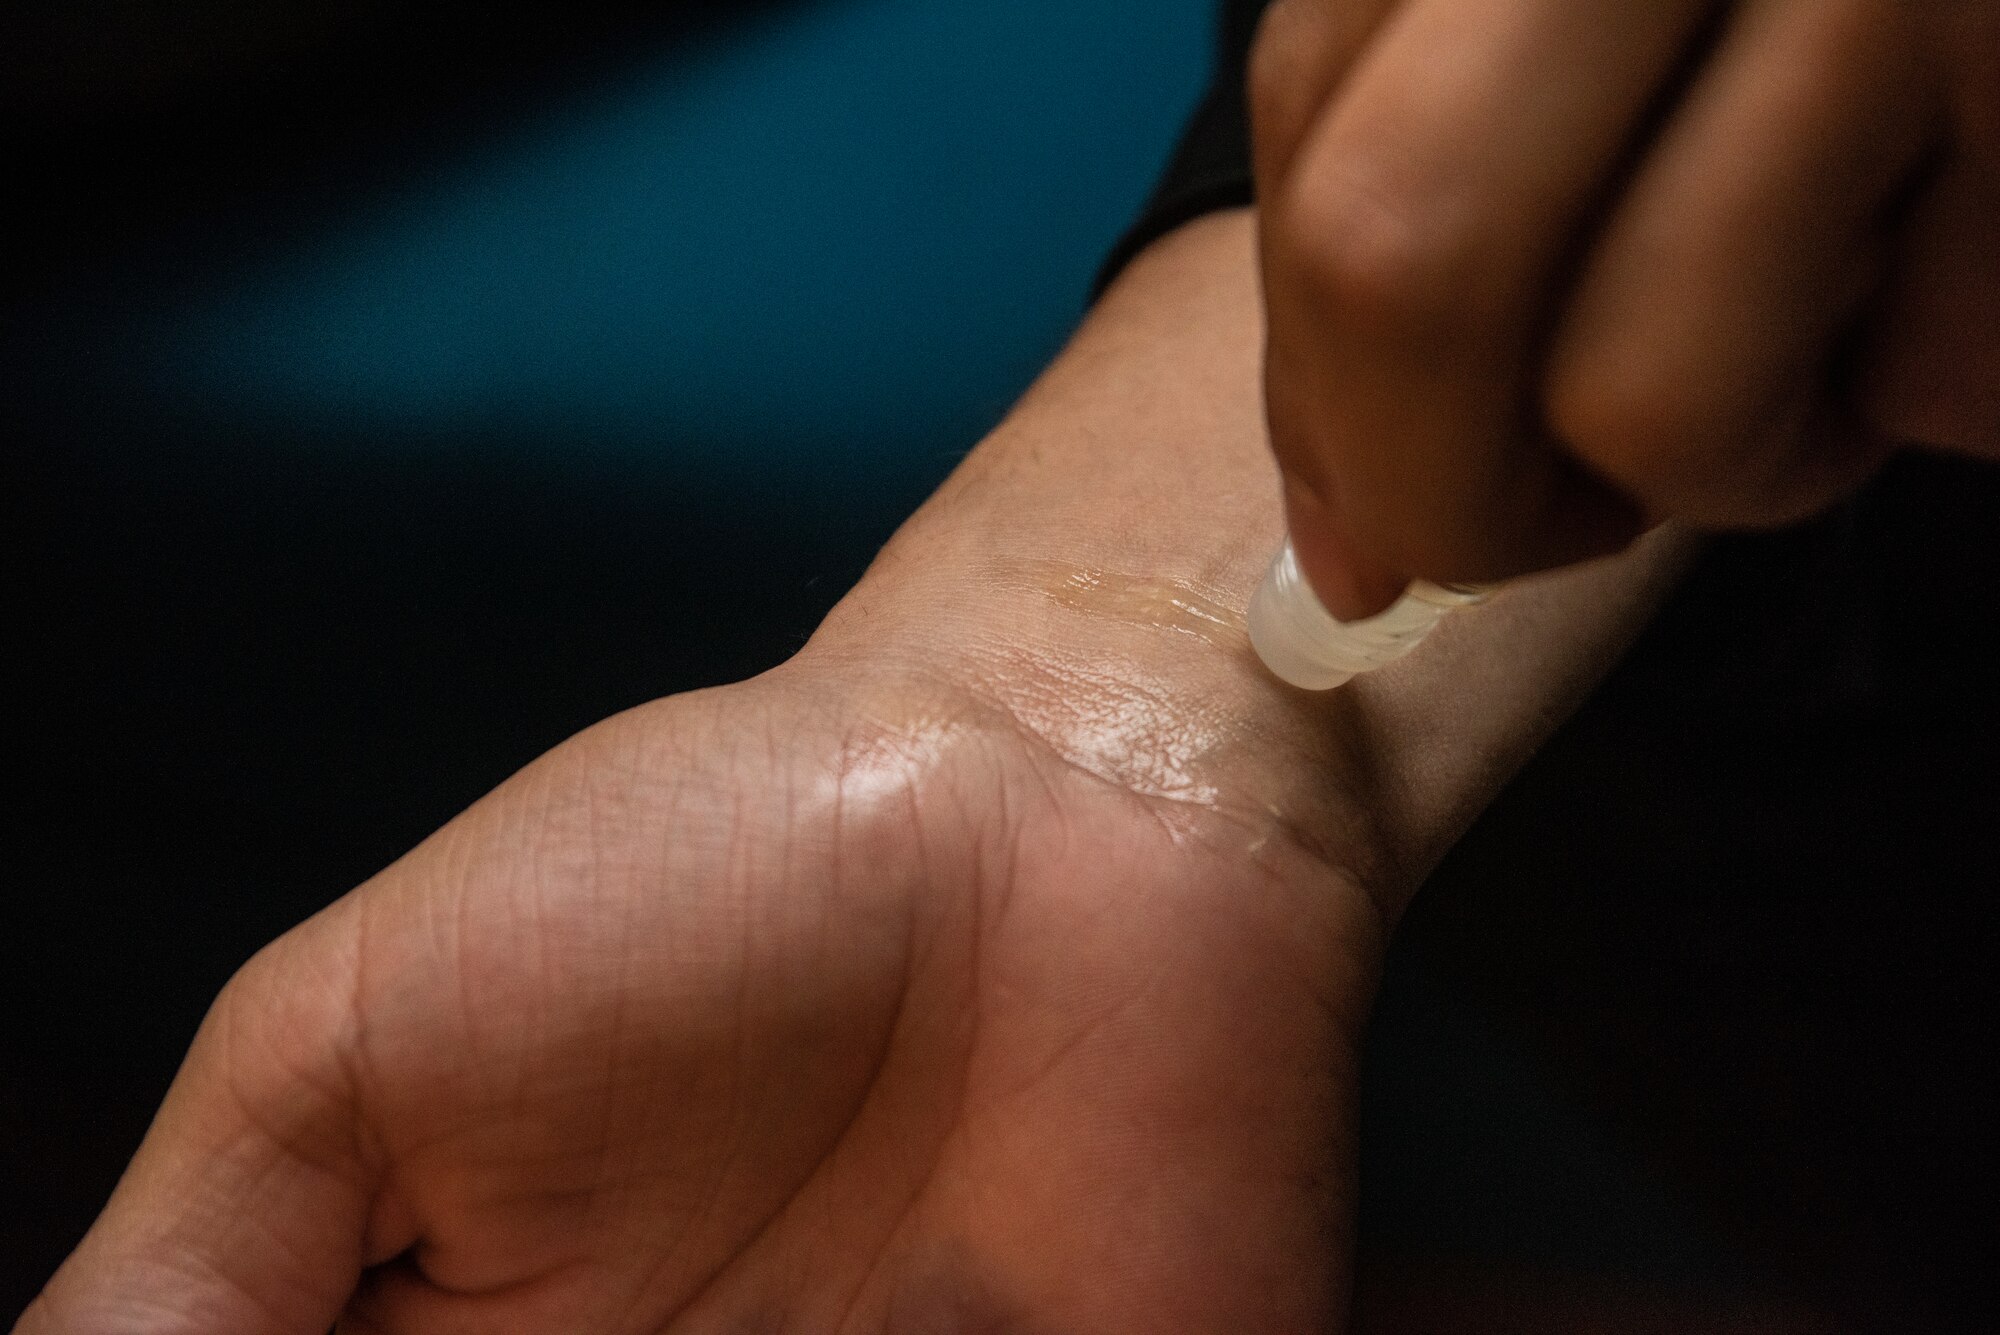 U.S. Air Force Senior Airman Dylan White, a 35th Security Forces Squadron military working dog handler, tests his new lavender oil roller on his wrist during an essential oils class at Misawa Air Base, Japan, March 12, 2019. White, along with eight other attendees received free oil samples and talked with each other, hearing stories of how others used oils in their home. (U.S. Air Force photo by Senior Airman Sadie Colbert)